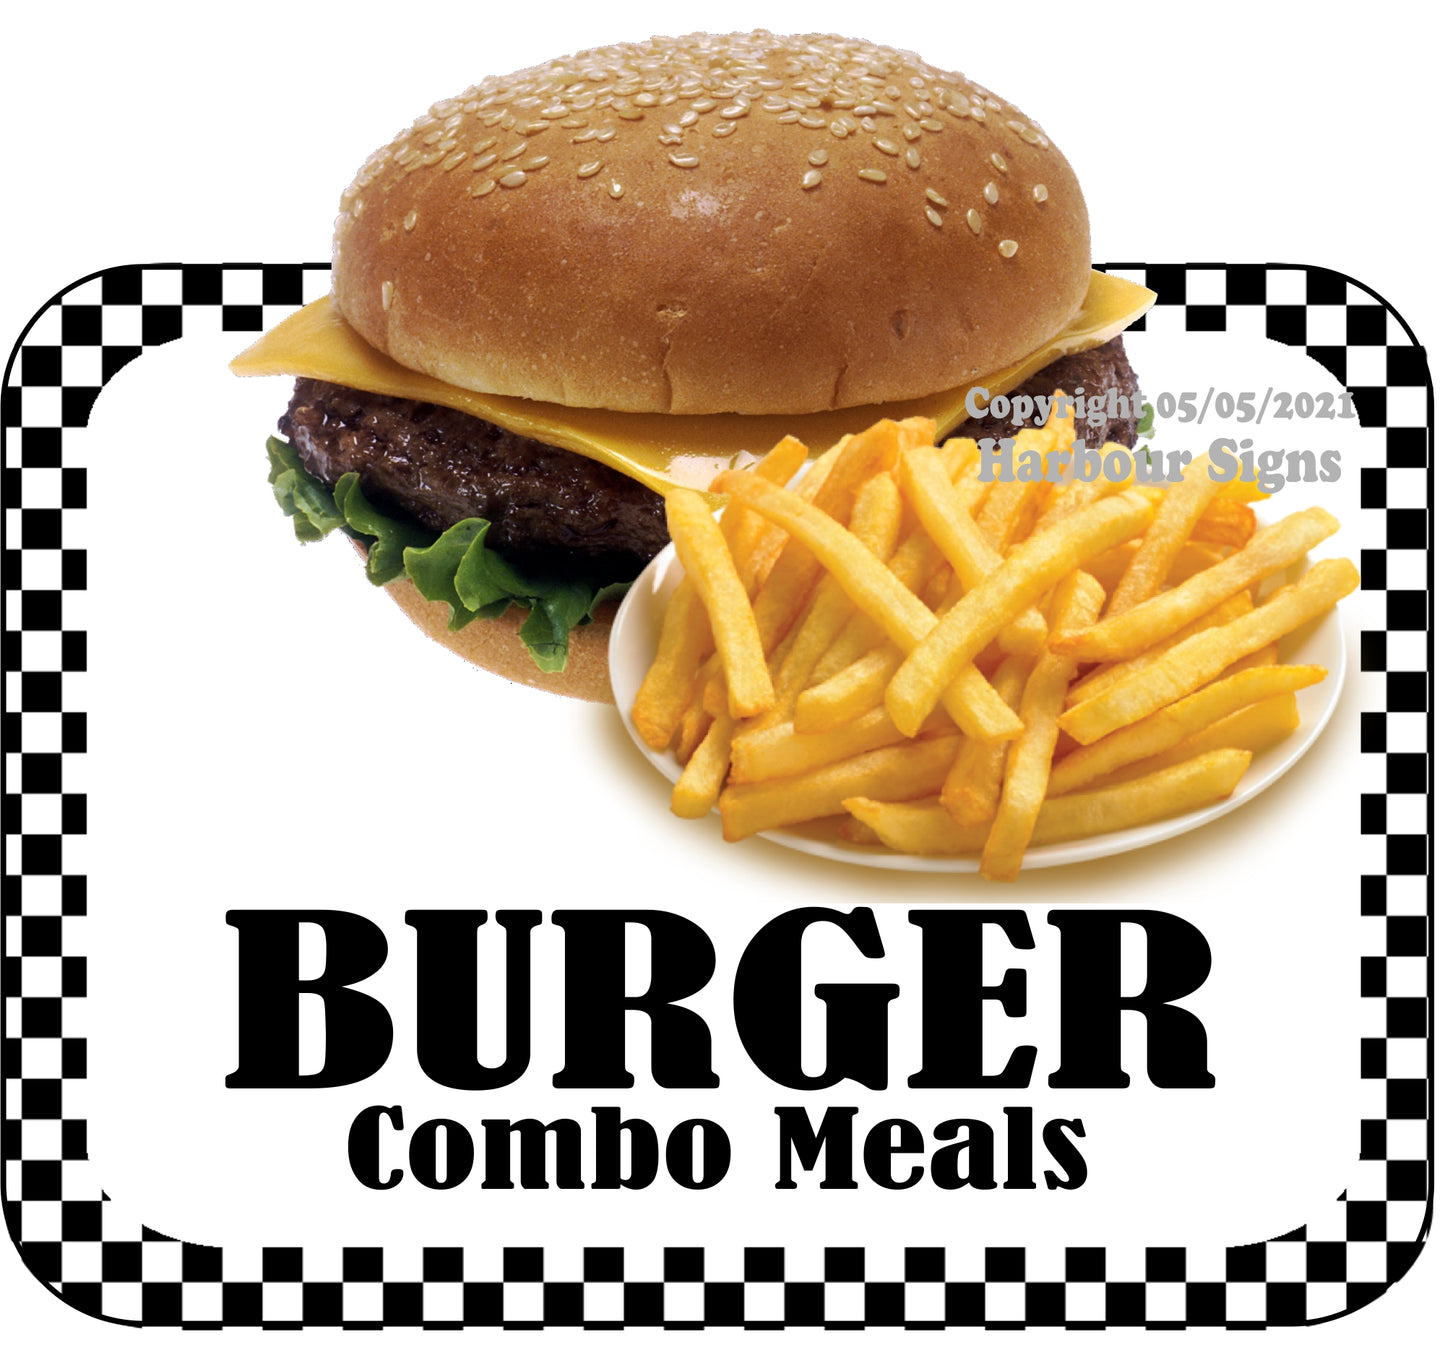 Burger Combo Meals Decal Food Truck Concession Vinyl Sticker bw